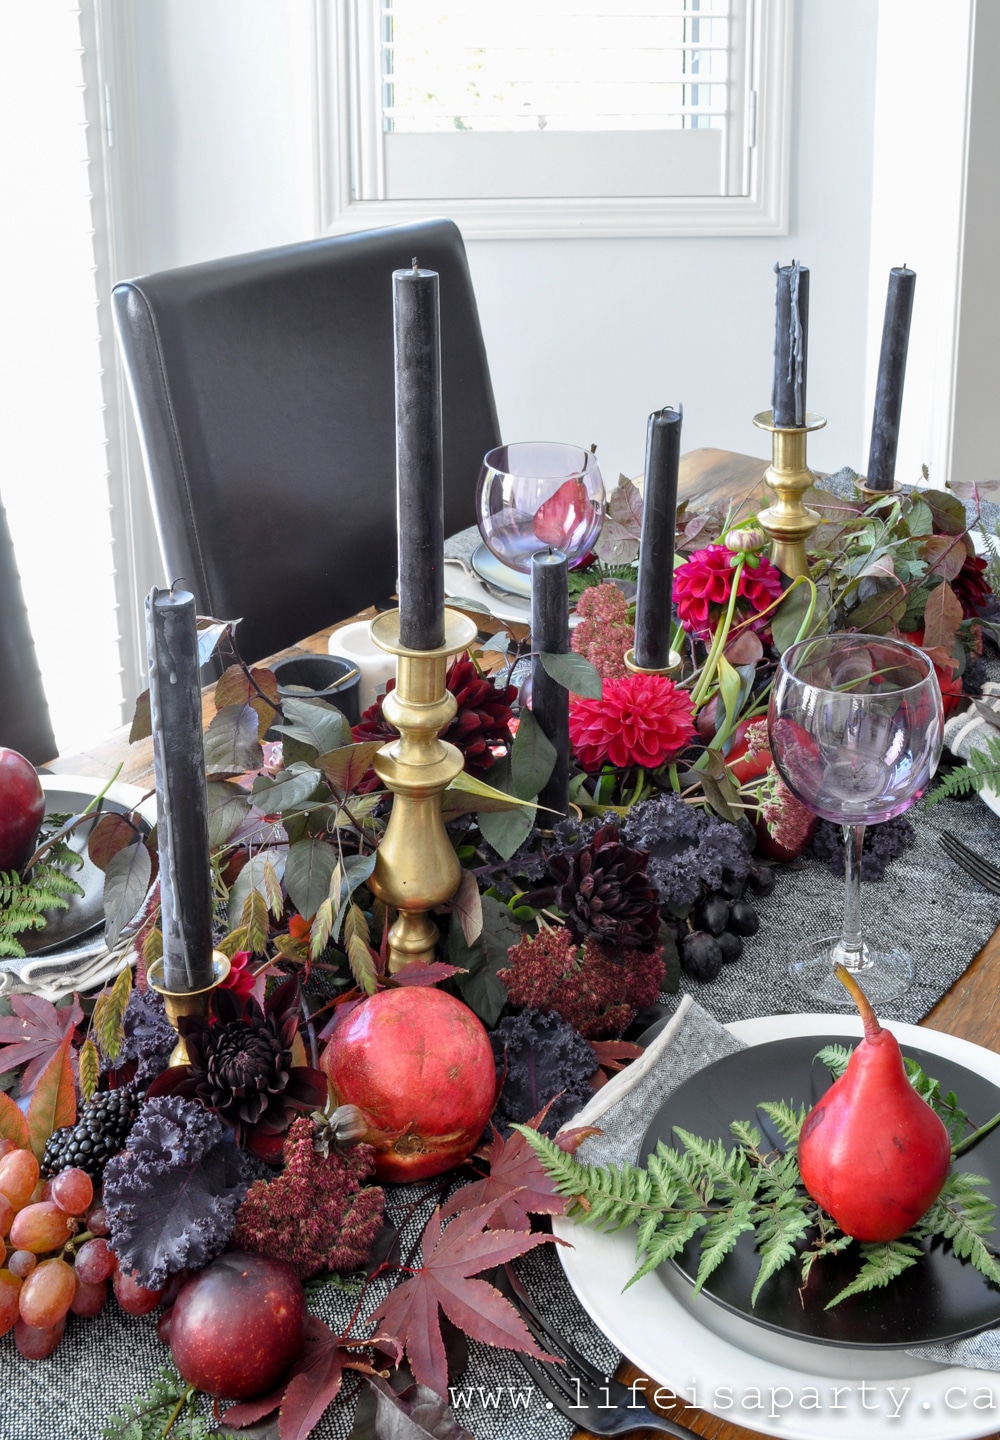 Dark and Moody Thanksgiving Table: purple leaves, dark dahlias, and plums, red pears, apples, pomegranates, and blackberries create the perfect centrepiece.